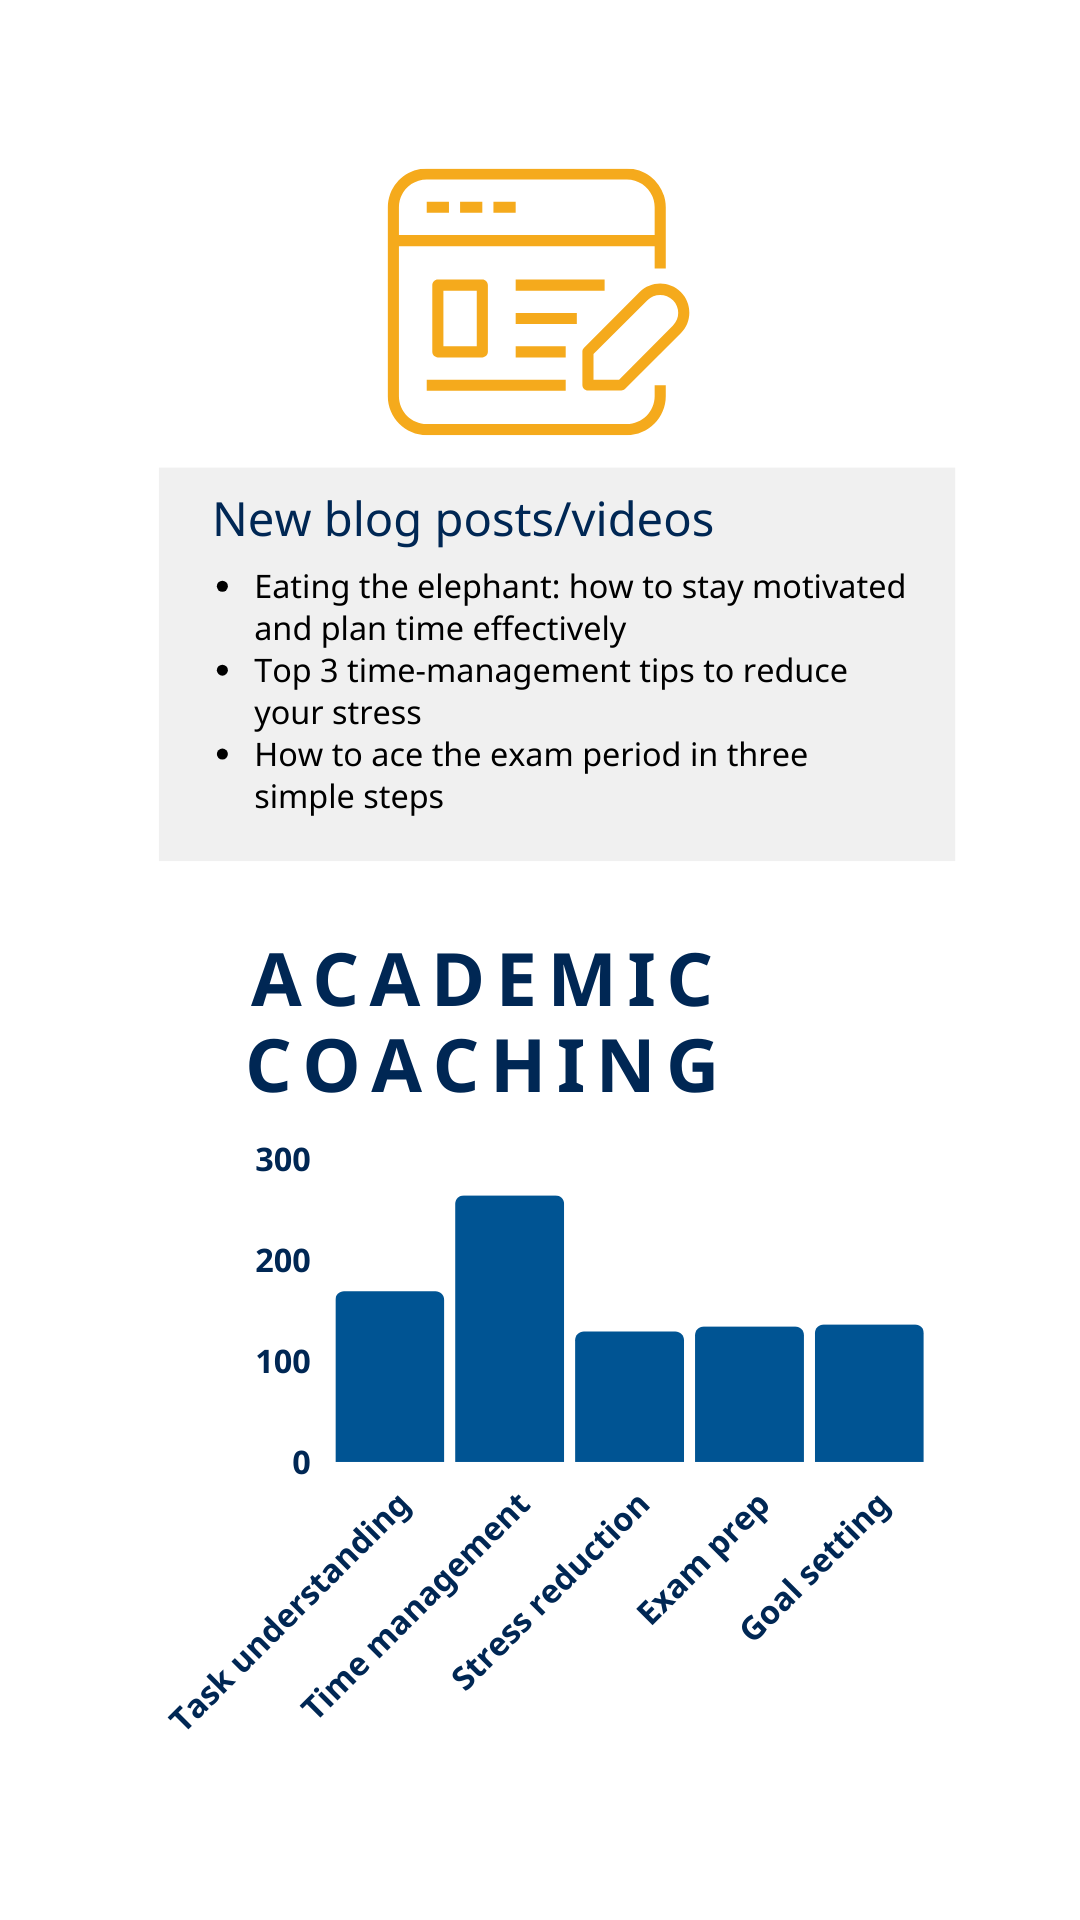 A graphic titled 'ACADEMIC COACHING' featuring a list of new blog posts/videos on the left, with topics on staying motivated, time management, and exam preparation. To the right, a bar graph labeled with various coaching services like task understanding, time management, and exam prep, showing the number of sessions provided.